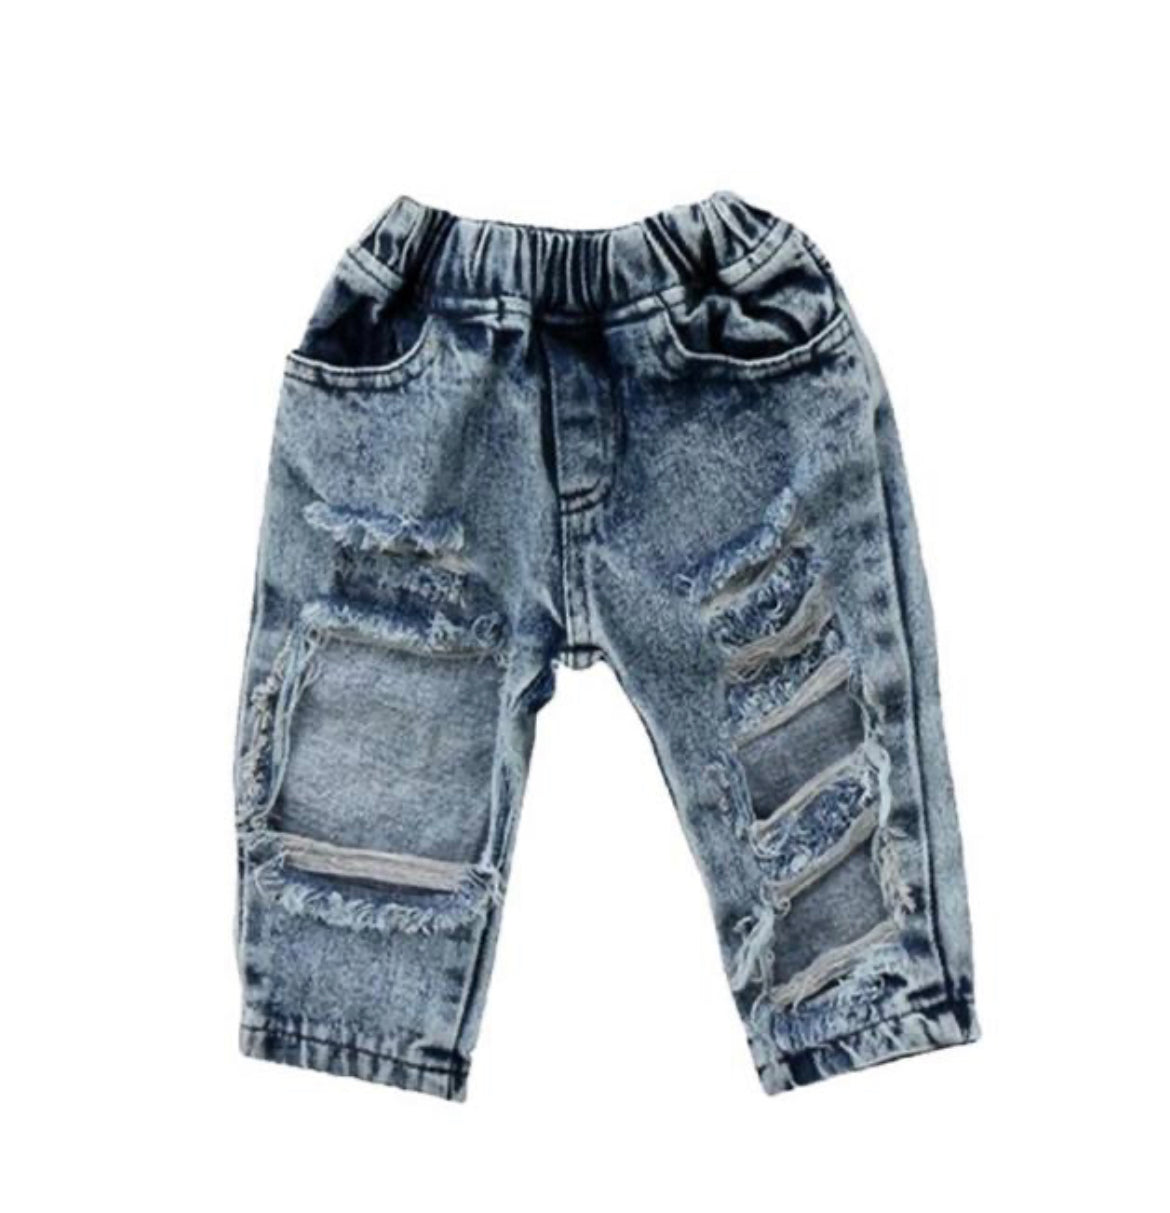 Acid Wash Ripped Jeans - TrendyDistressed Baby Jeans.